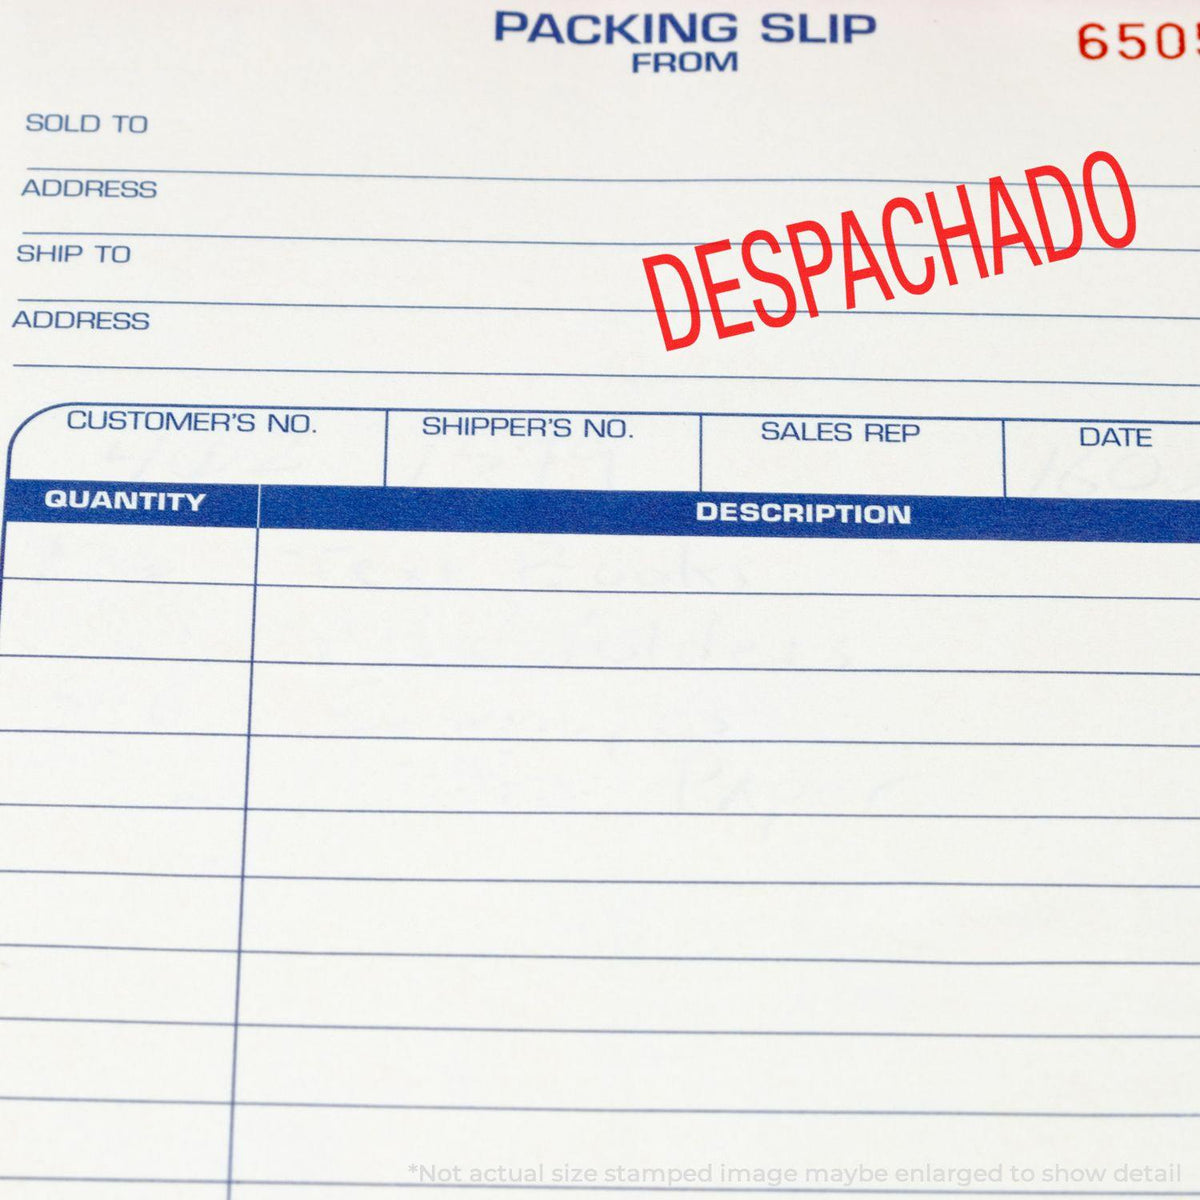 Large Self-Inking Despachado Stamp - Engineer Seal Stamps - Brand_Trodat, Impression Size_Large, Stamp Type_Self-Inking Stamp, Type of Use_Office, Type of Use_Shipping &amp; Receiving